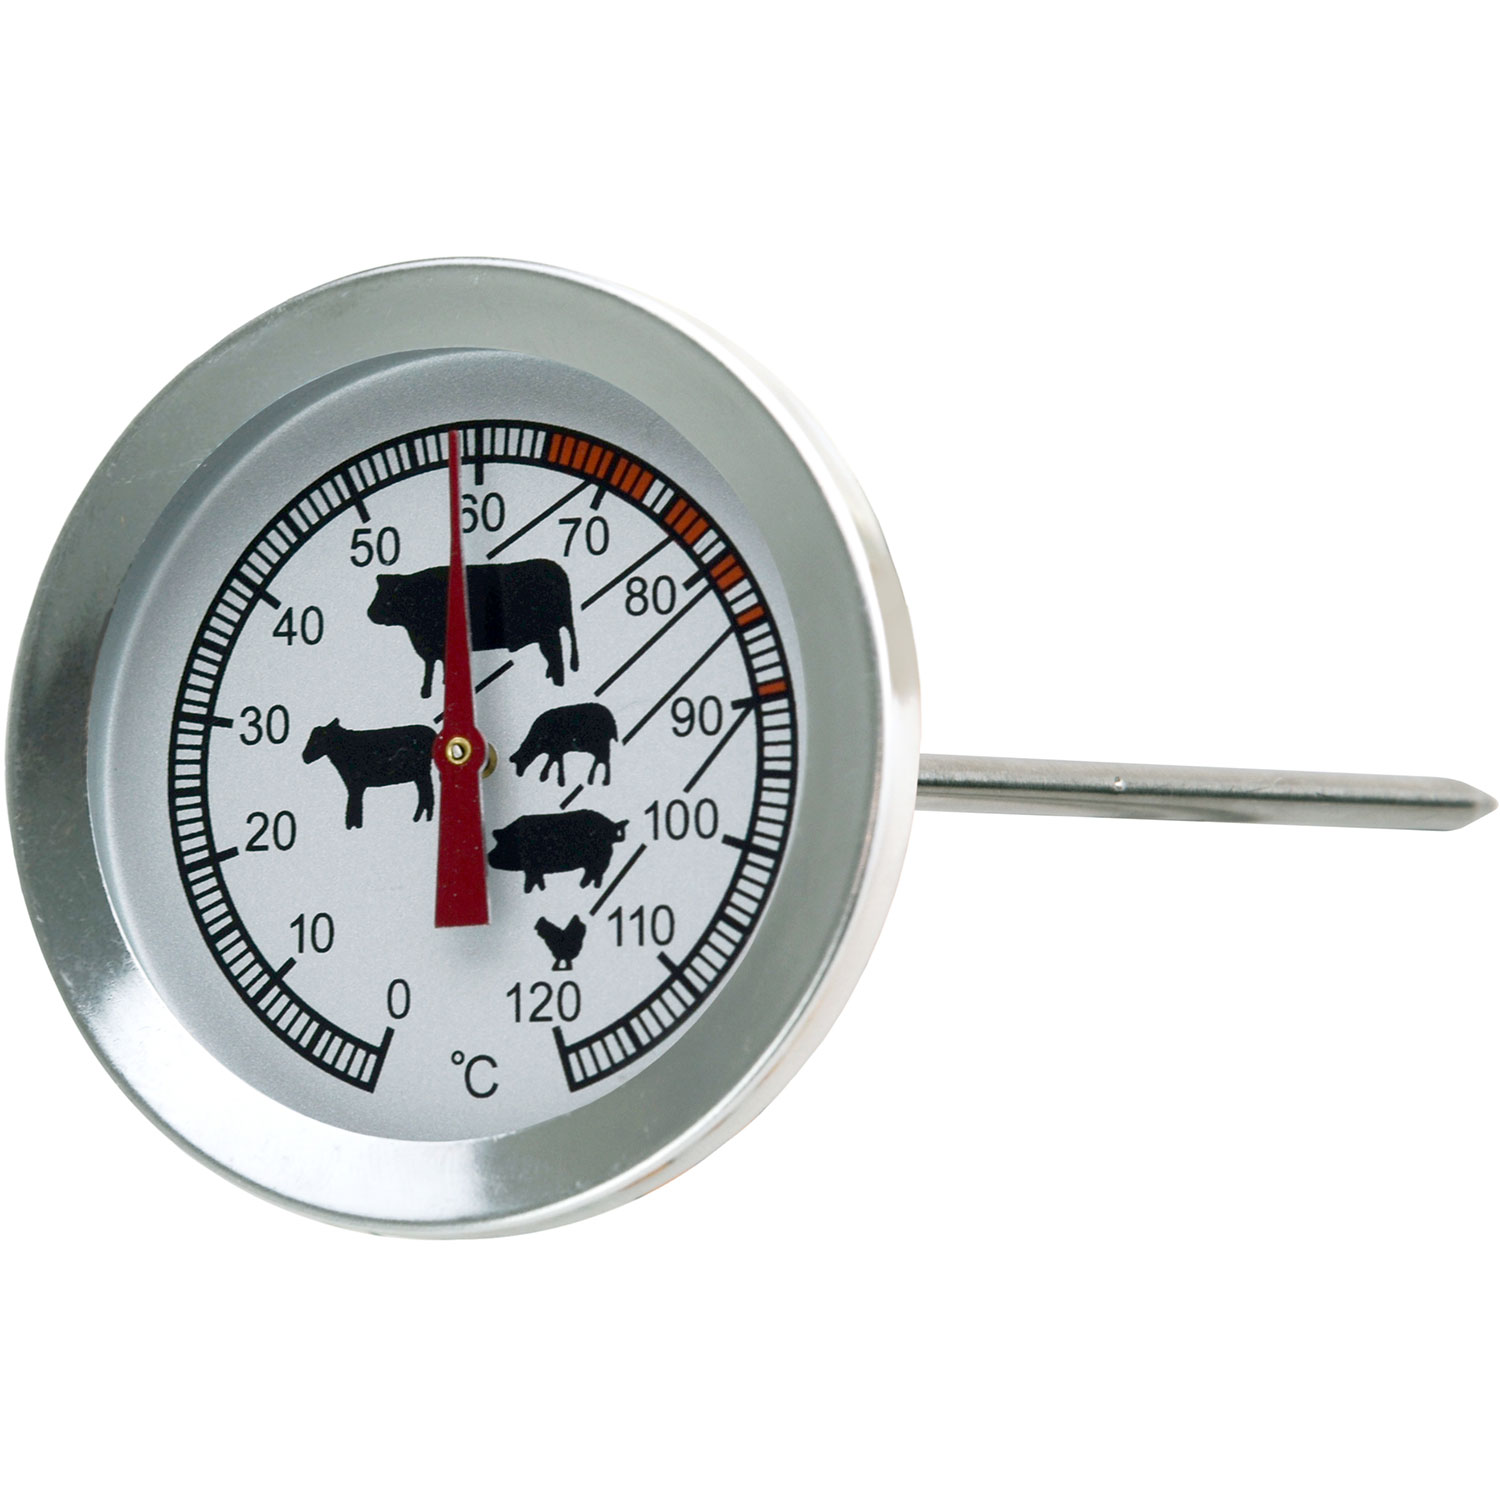 Shop the latest ETi Superfast Thermapen 'One' Thermometer, Free Shipping,  Shop now!